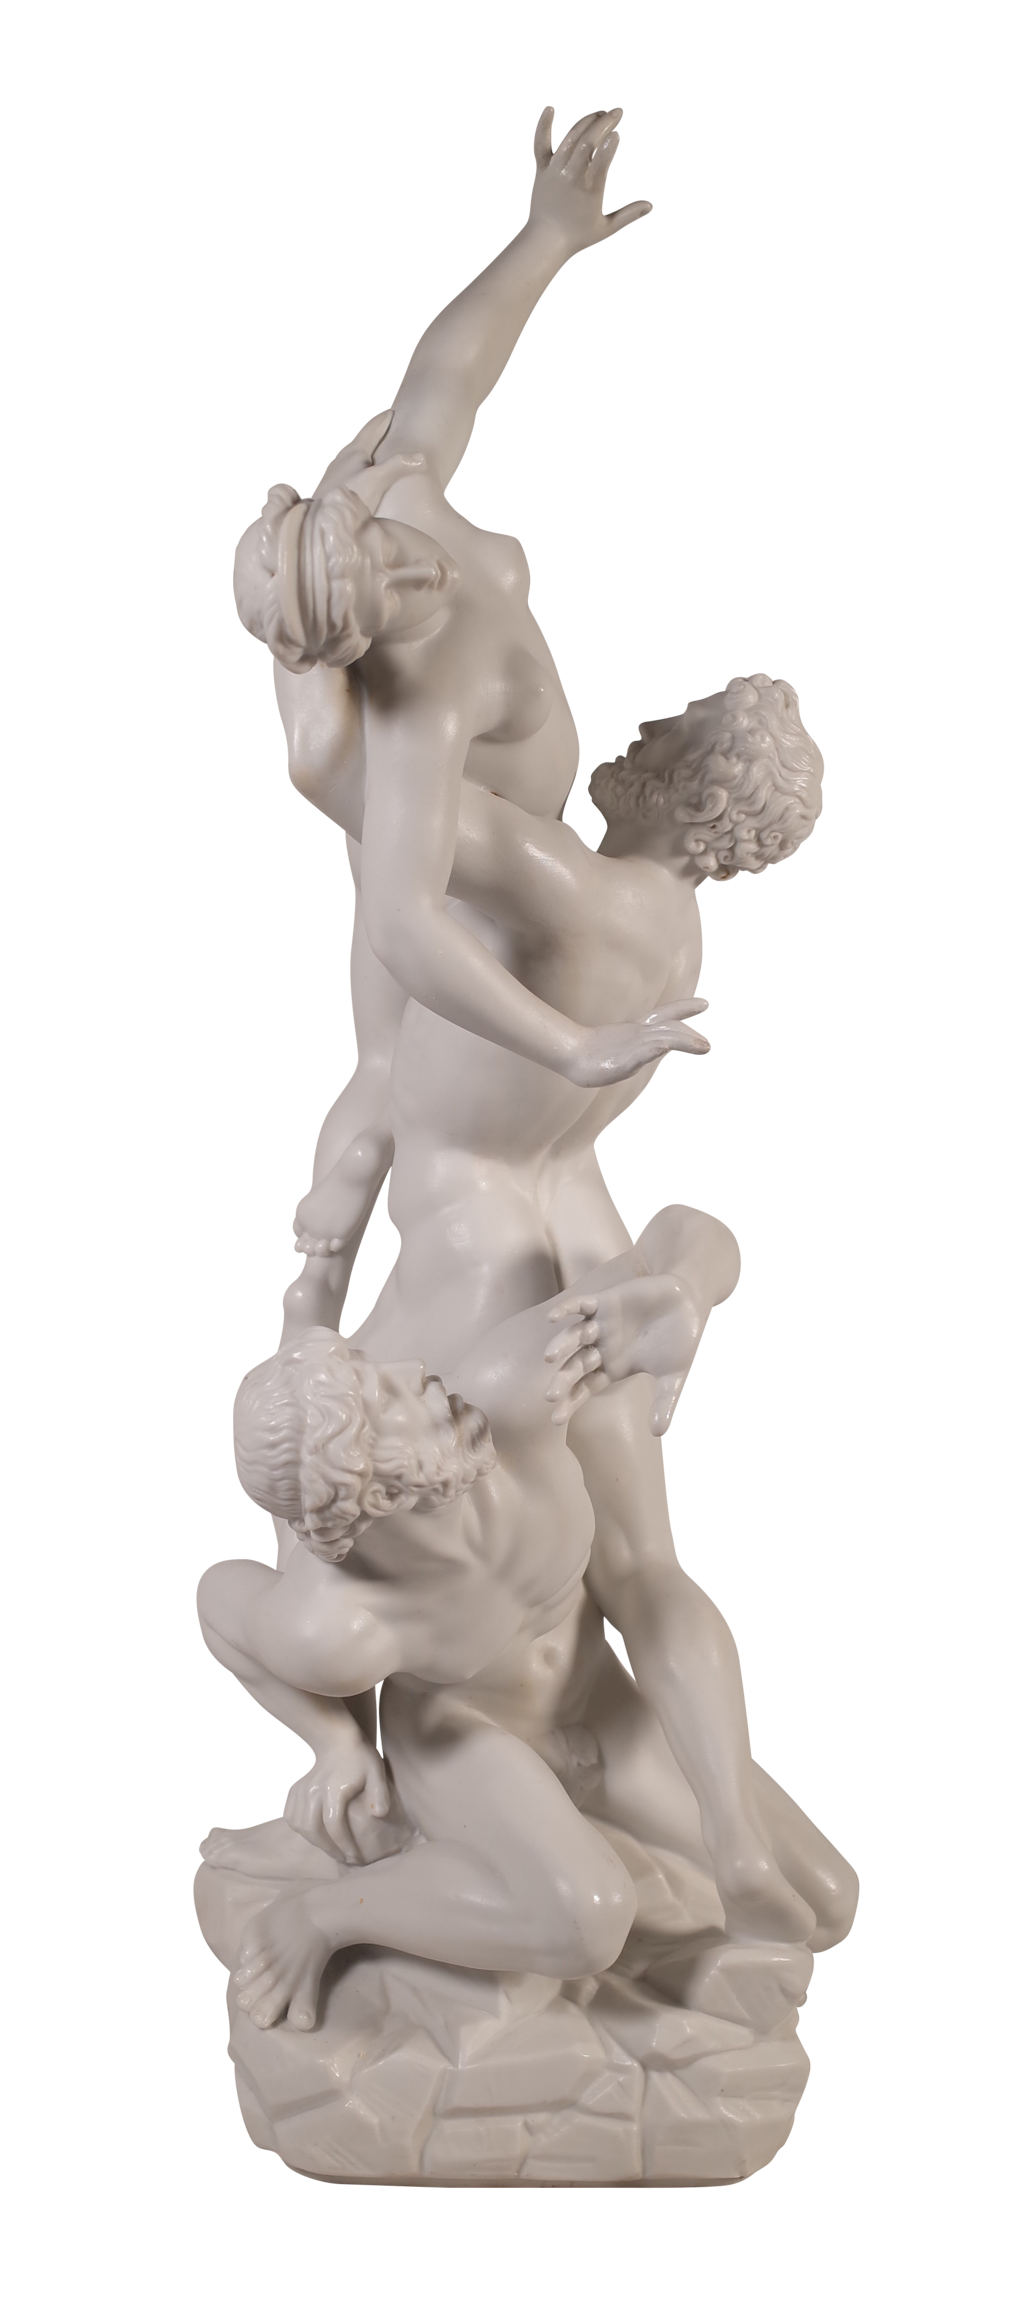 Parian Ware figure of the ‘Abduction of a Sabine Woman’